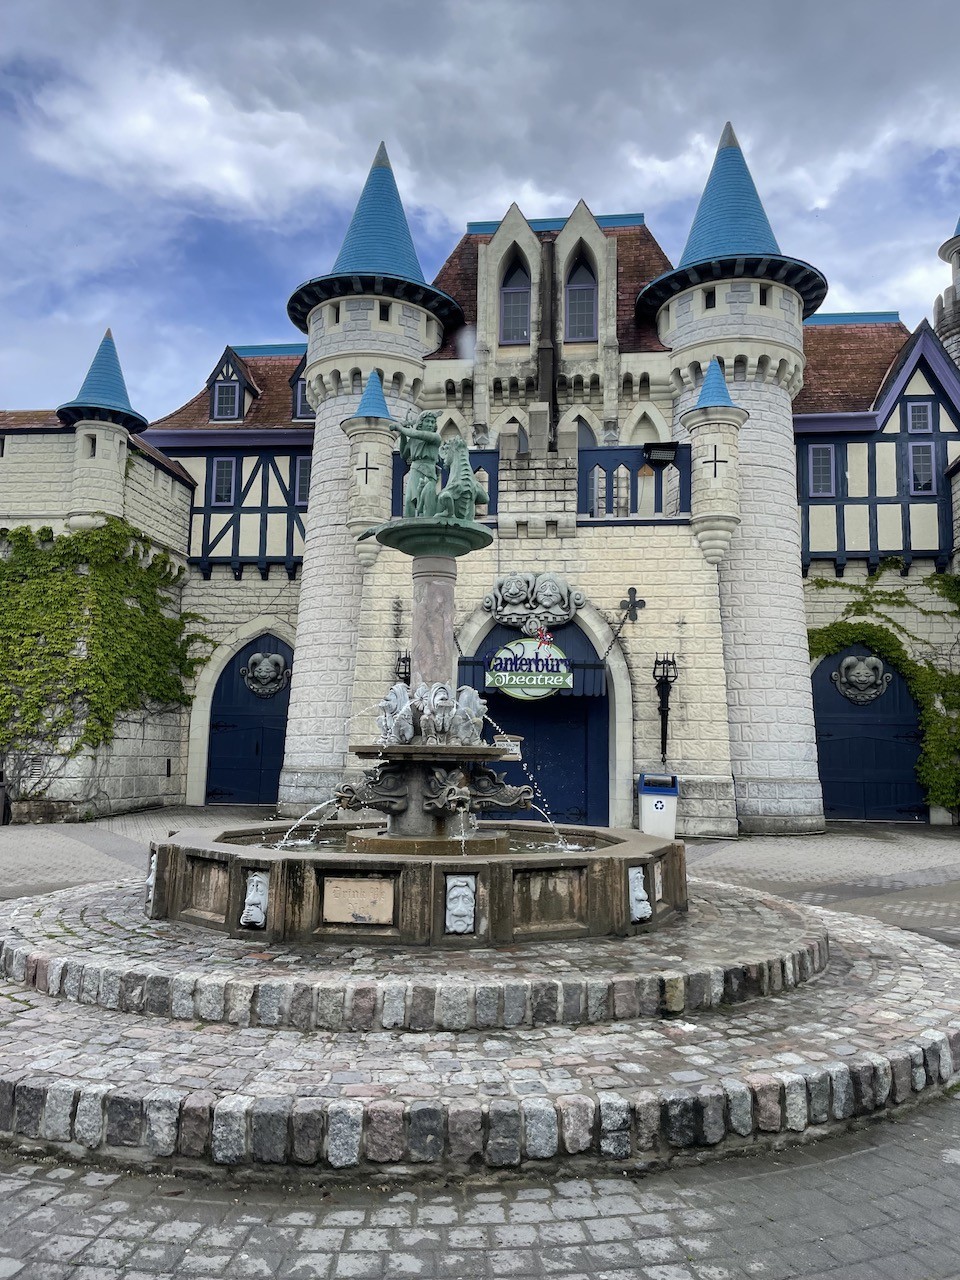 Canterbury  Theatre at Canada's Wonderland Vaughn Ontario 2024-06-26 - The Canterbury Theatre hosts entertaining and engaging shows throughout the season at Canada's Wonderland in Vaughn, Ontario